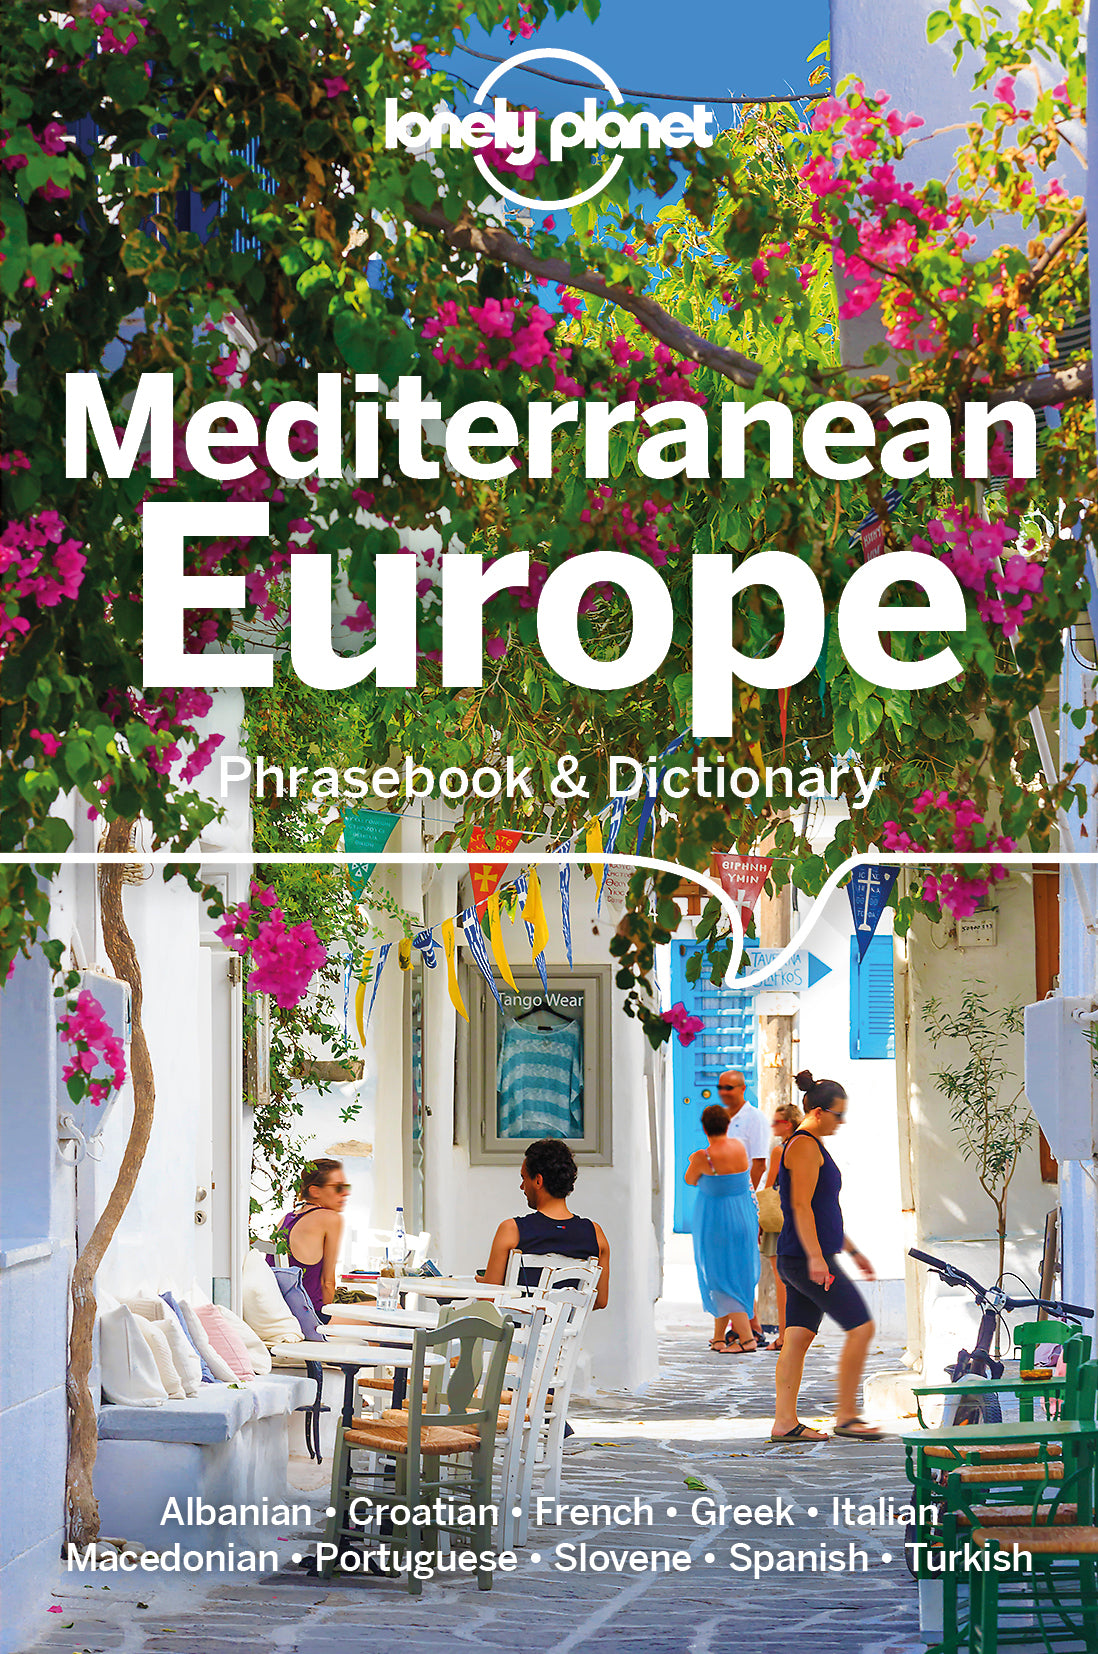 Lonely Planet Mediterranean Europe Phrasebook and Dictionary 4 4th Ed [Book]